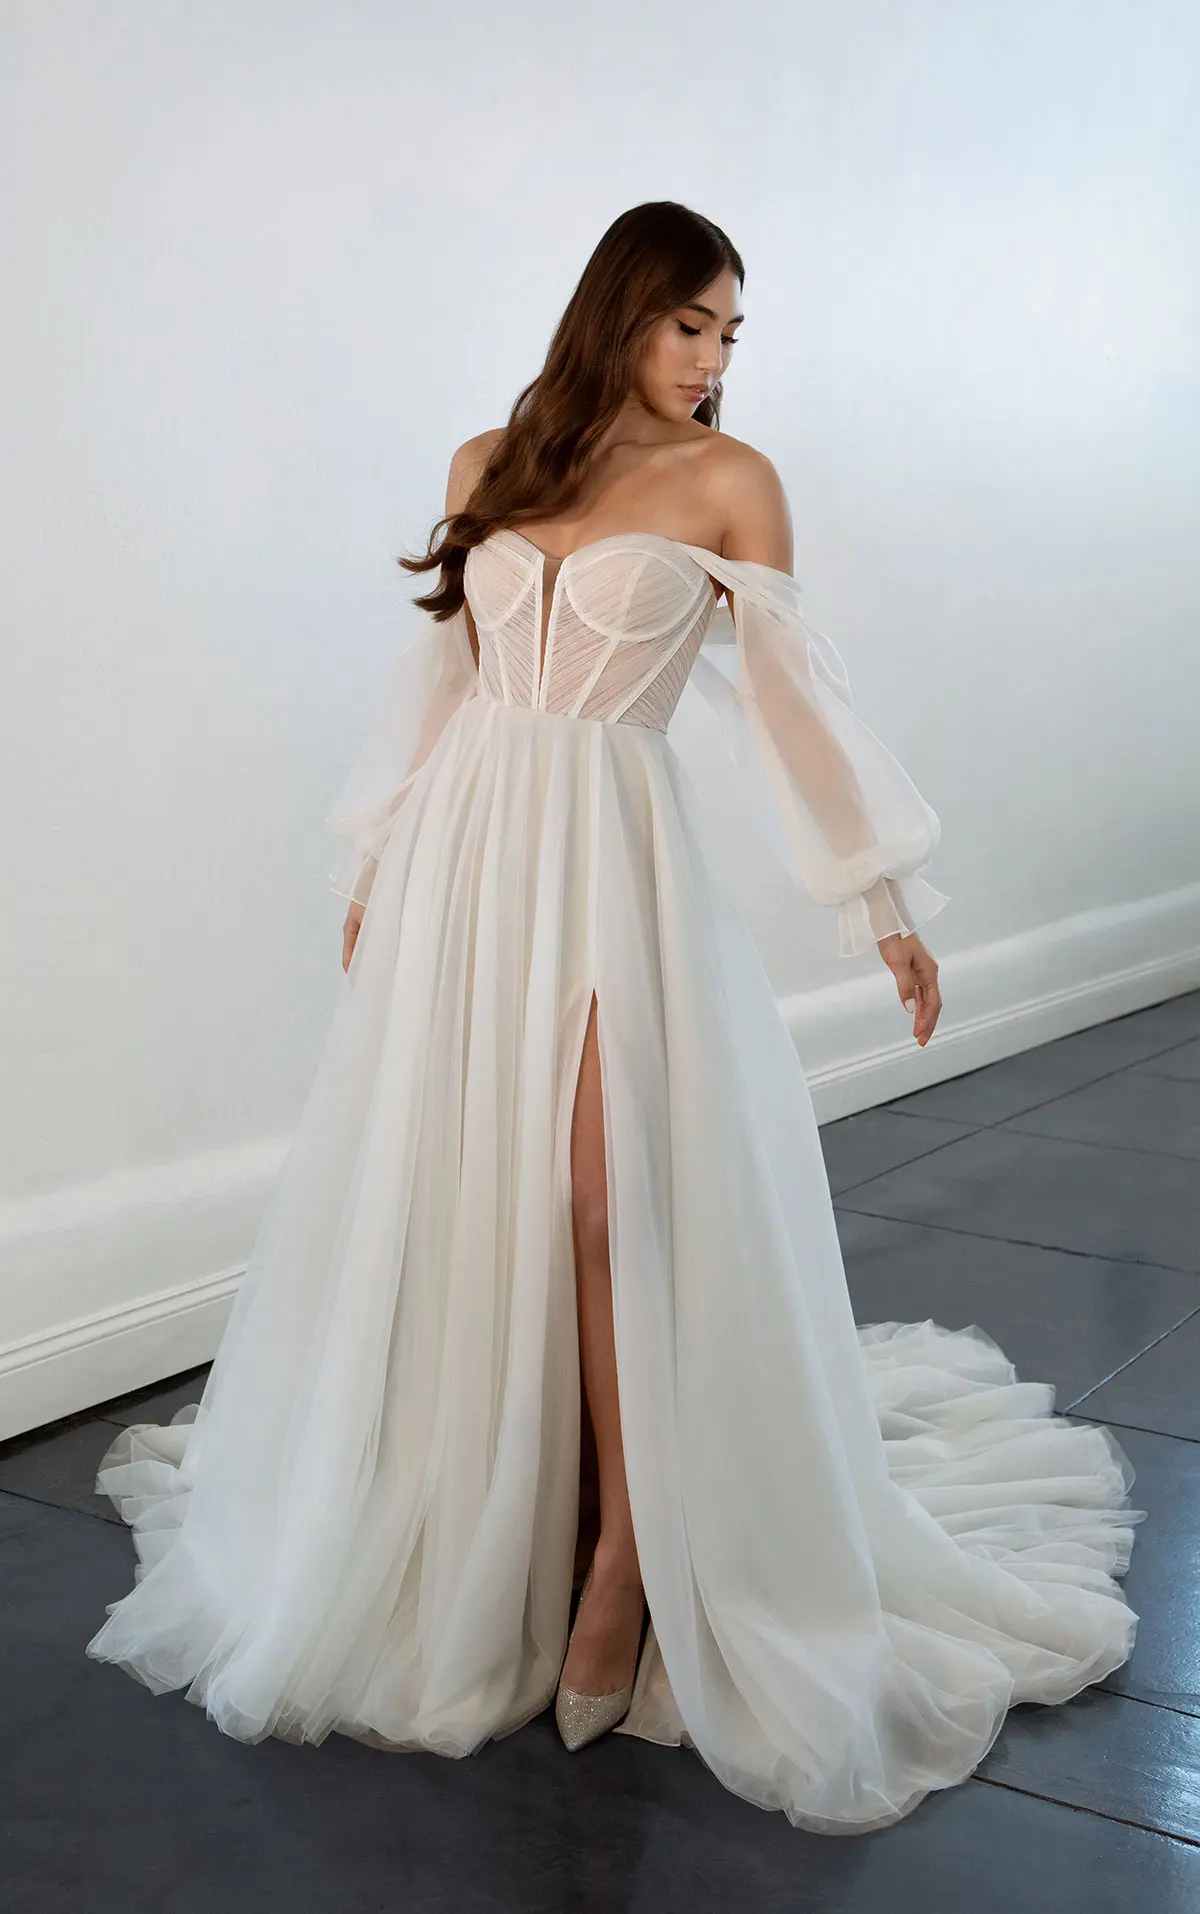 Romantic Organza A-Line Gown With Detachable Sleeves by Martina Liana - Image 1